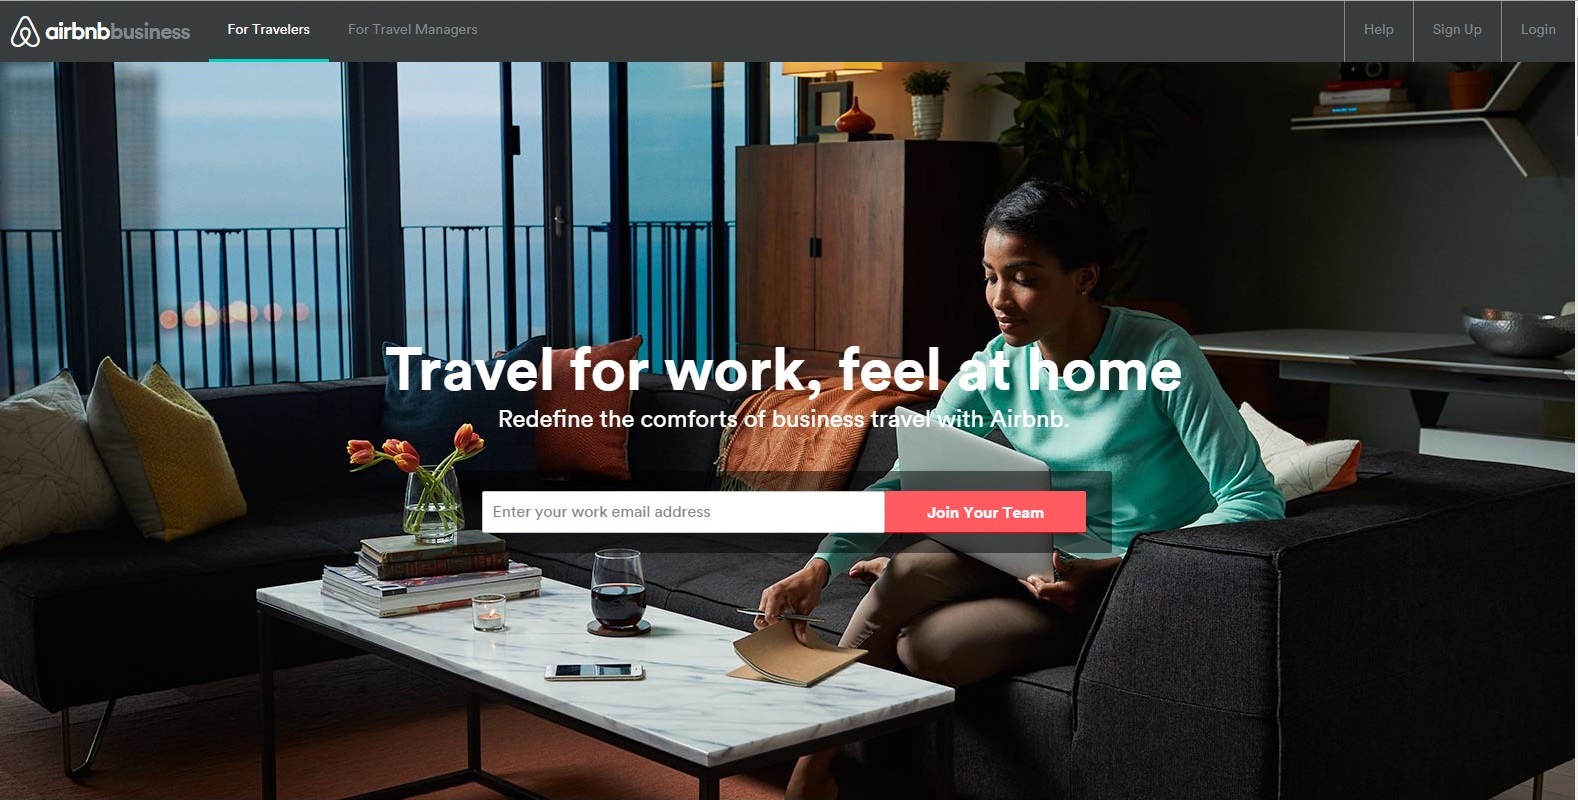 is airbnb for business travel